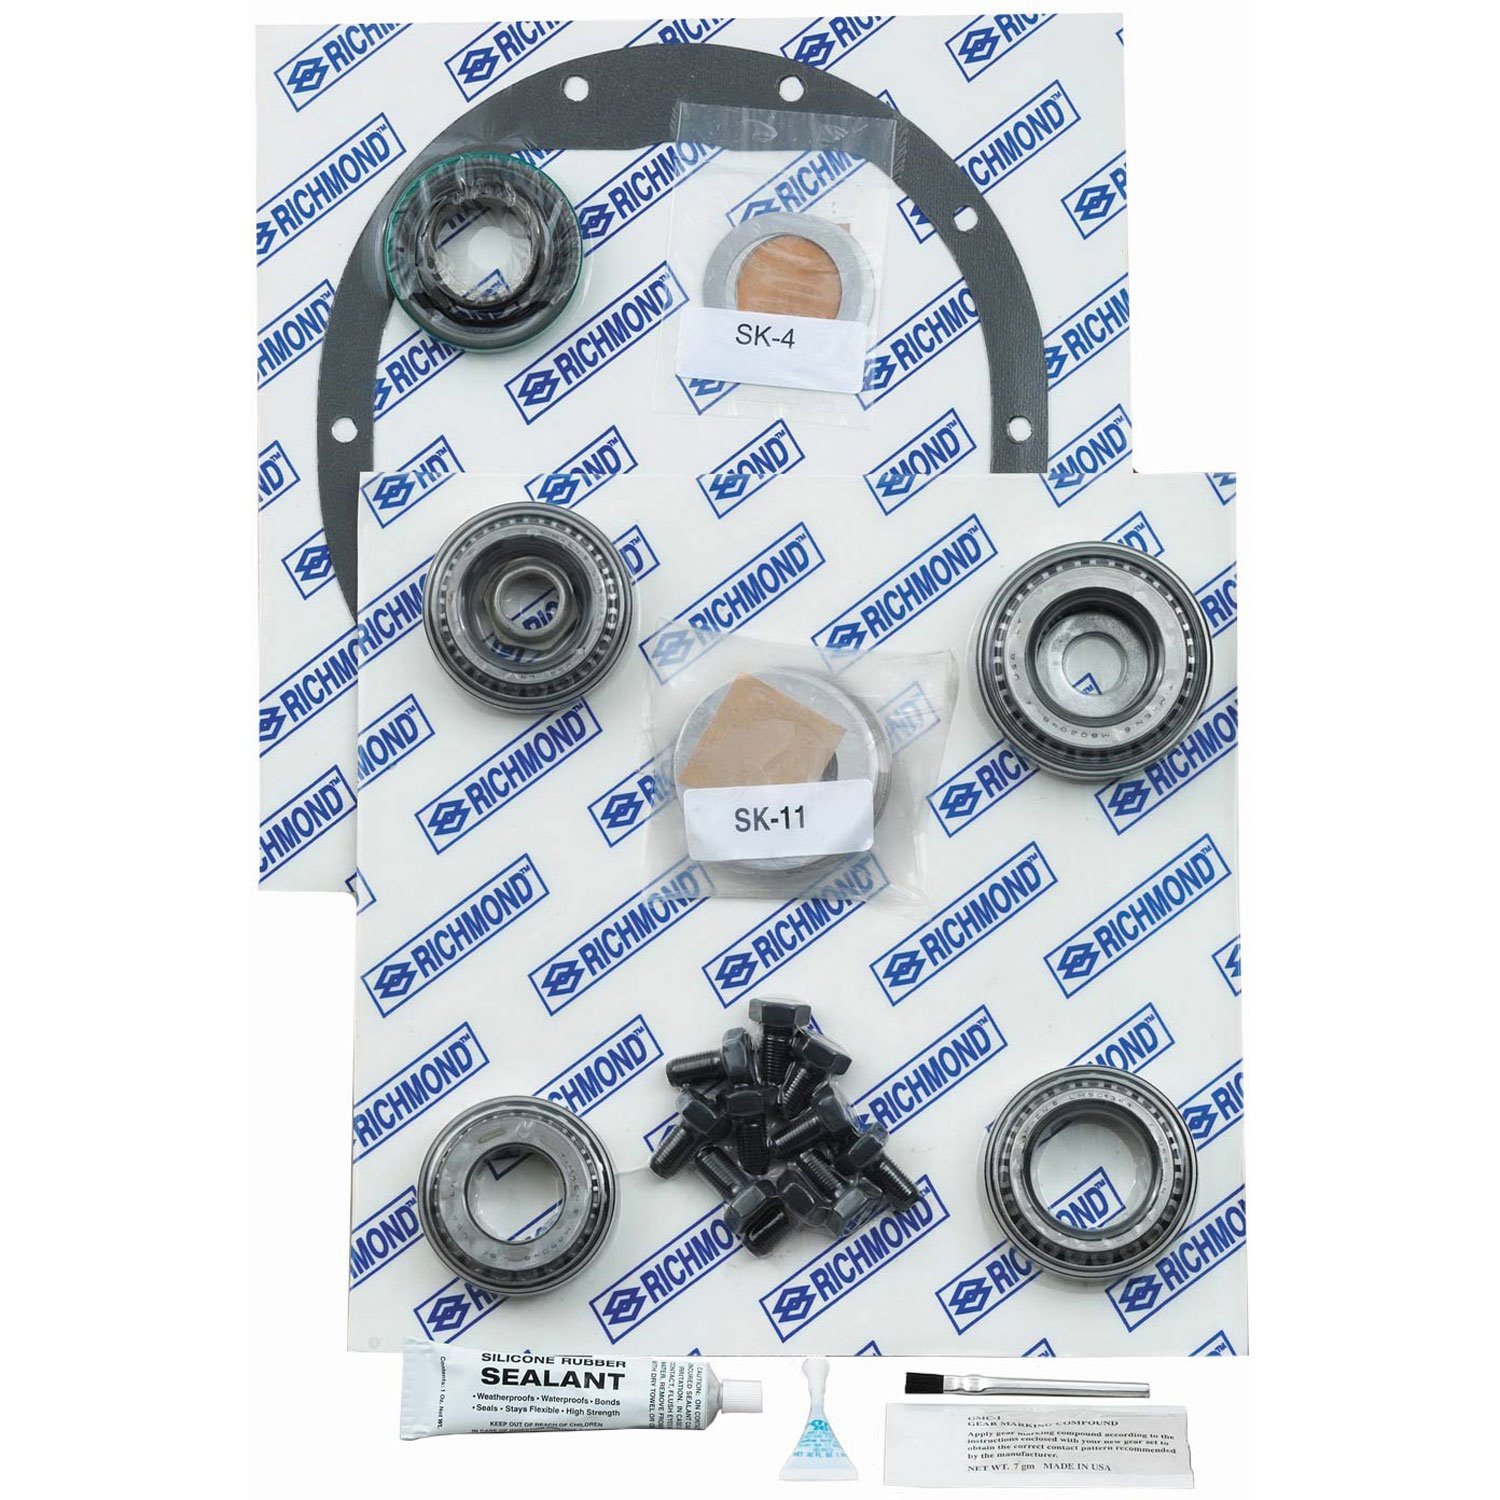 Half Ring And Pinion Installation Kit Fits Chrysler 8.25/8.375 in. Incl. Cover Gasket/Crush Sleeve/Pinion Shims